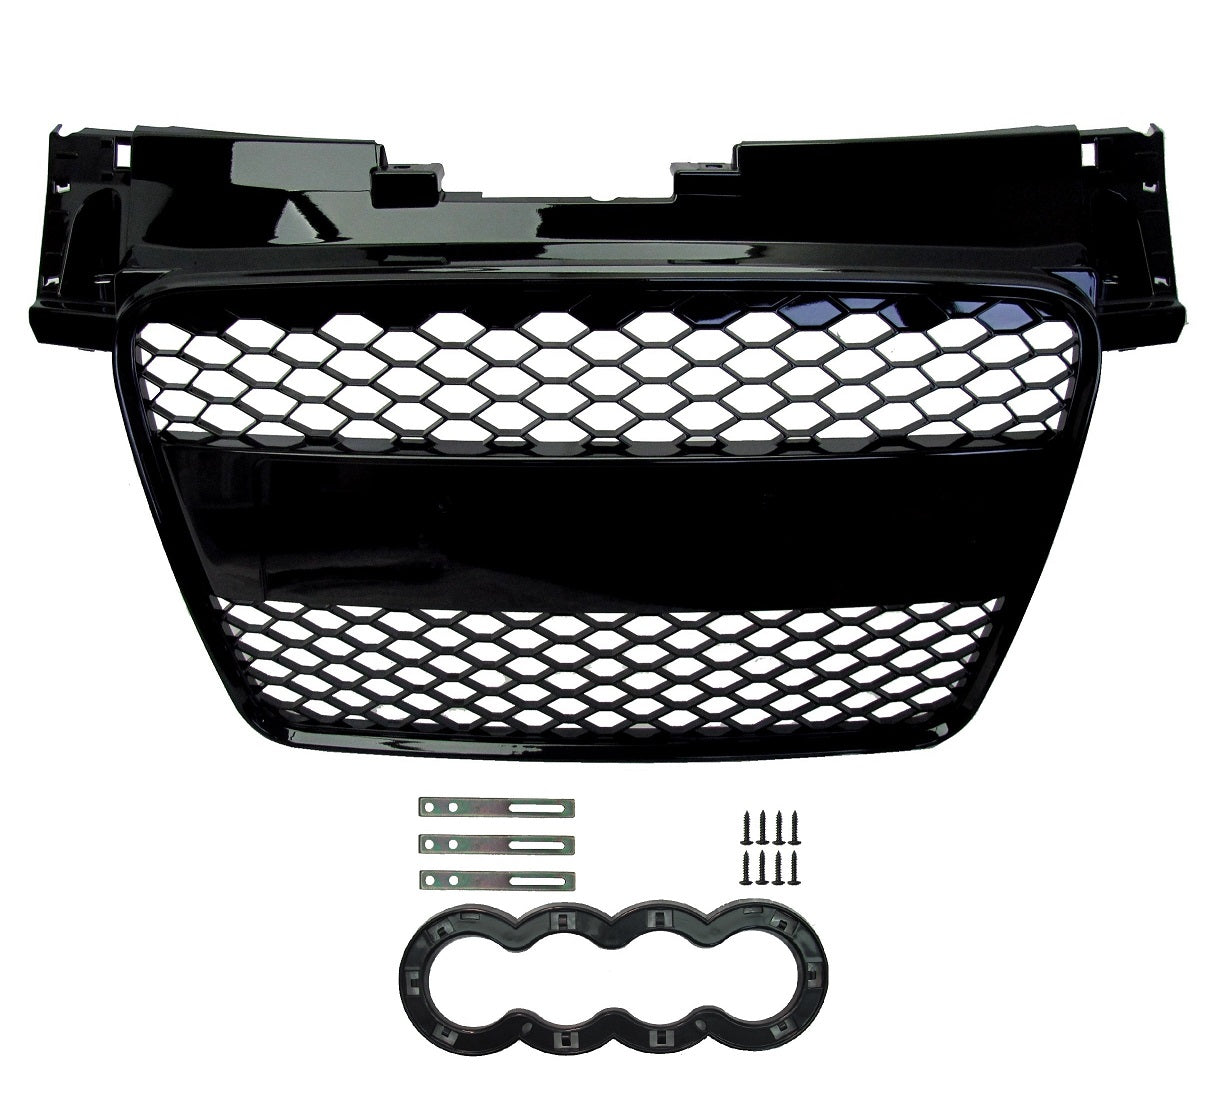  Fits for Audi A3 8P Facelift Badgeless Mesh Grill Sport Front  Grill Emblemholder : Automotive